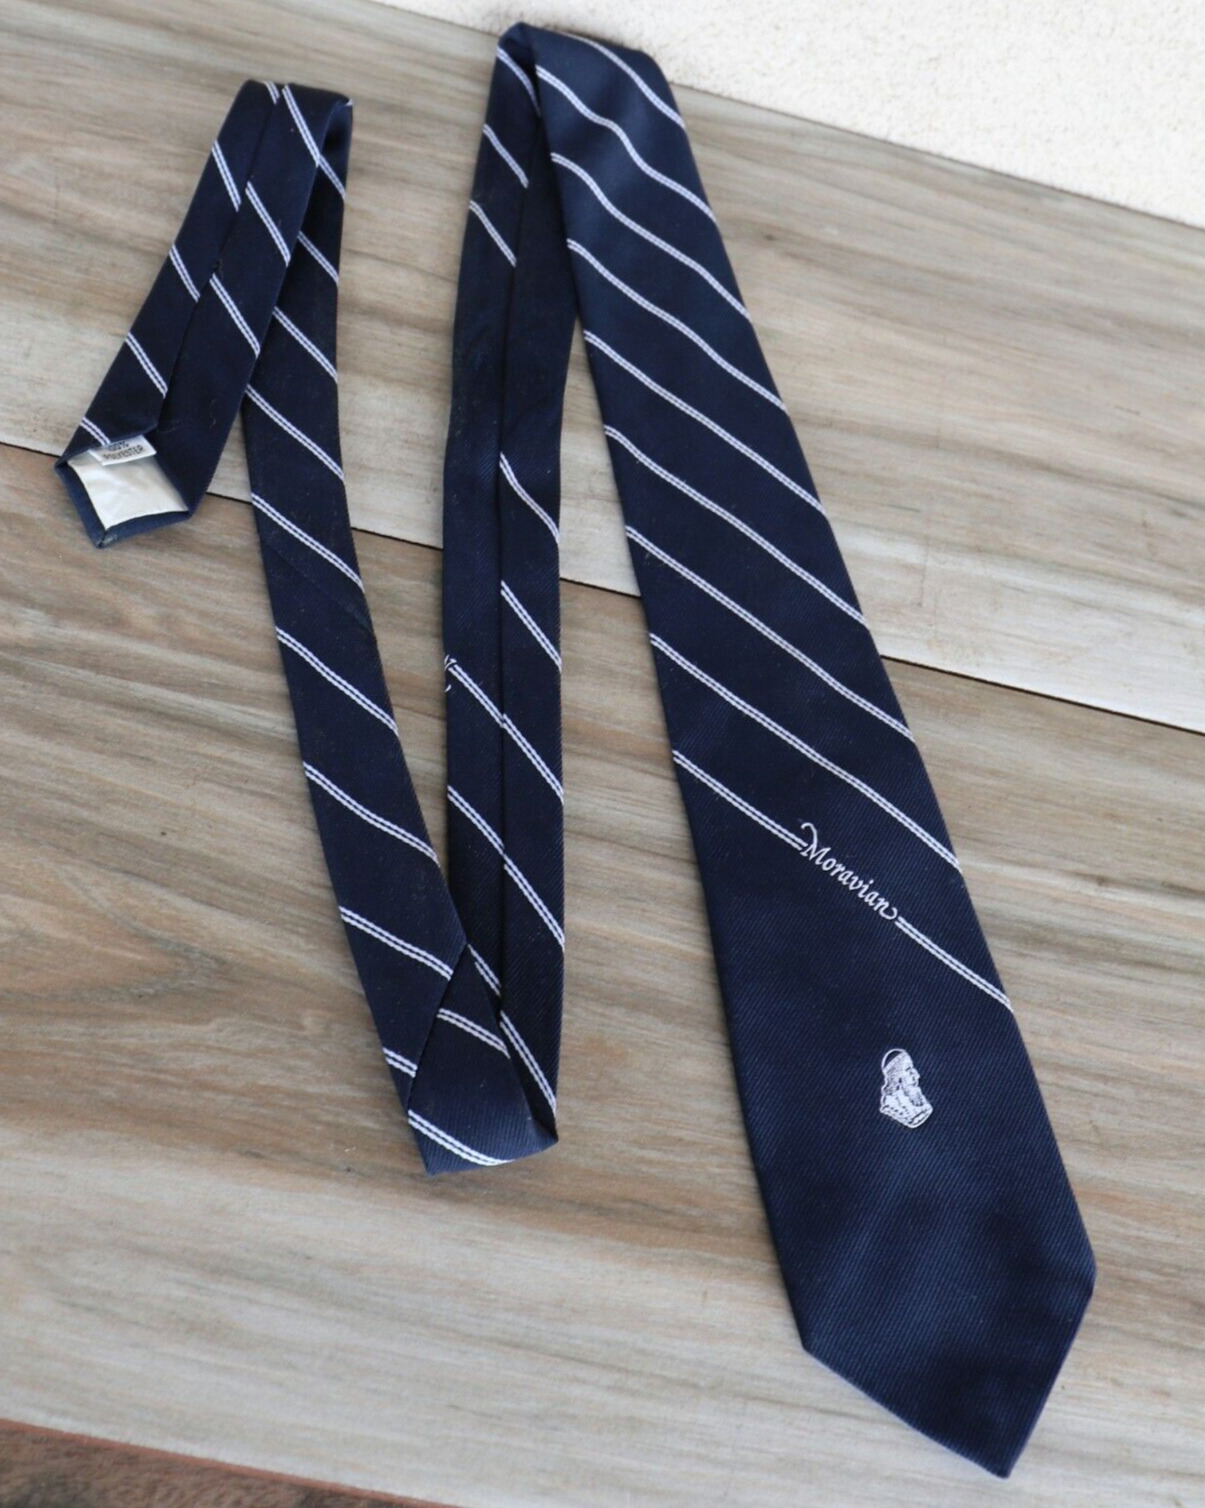 Rare Vintage MORAVIAN COLLEGE Tie - By Michael Bruce Navy & White Pennsylvania